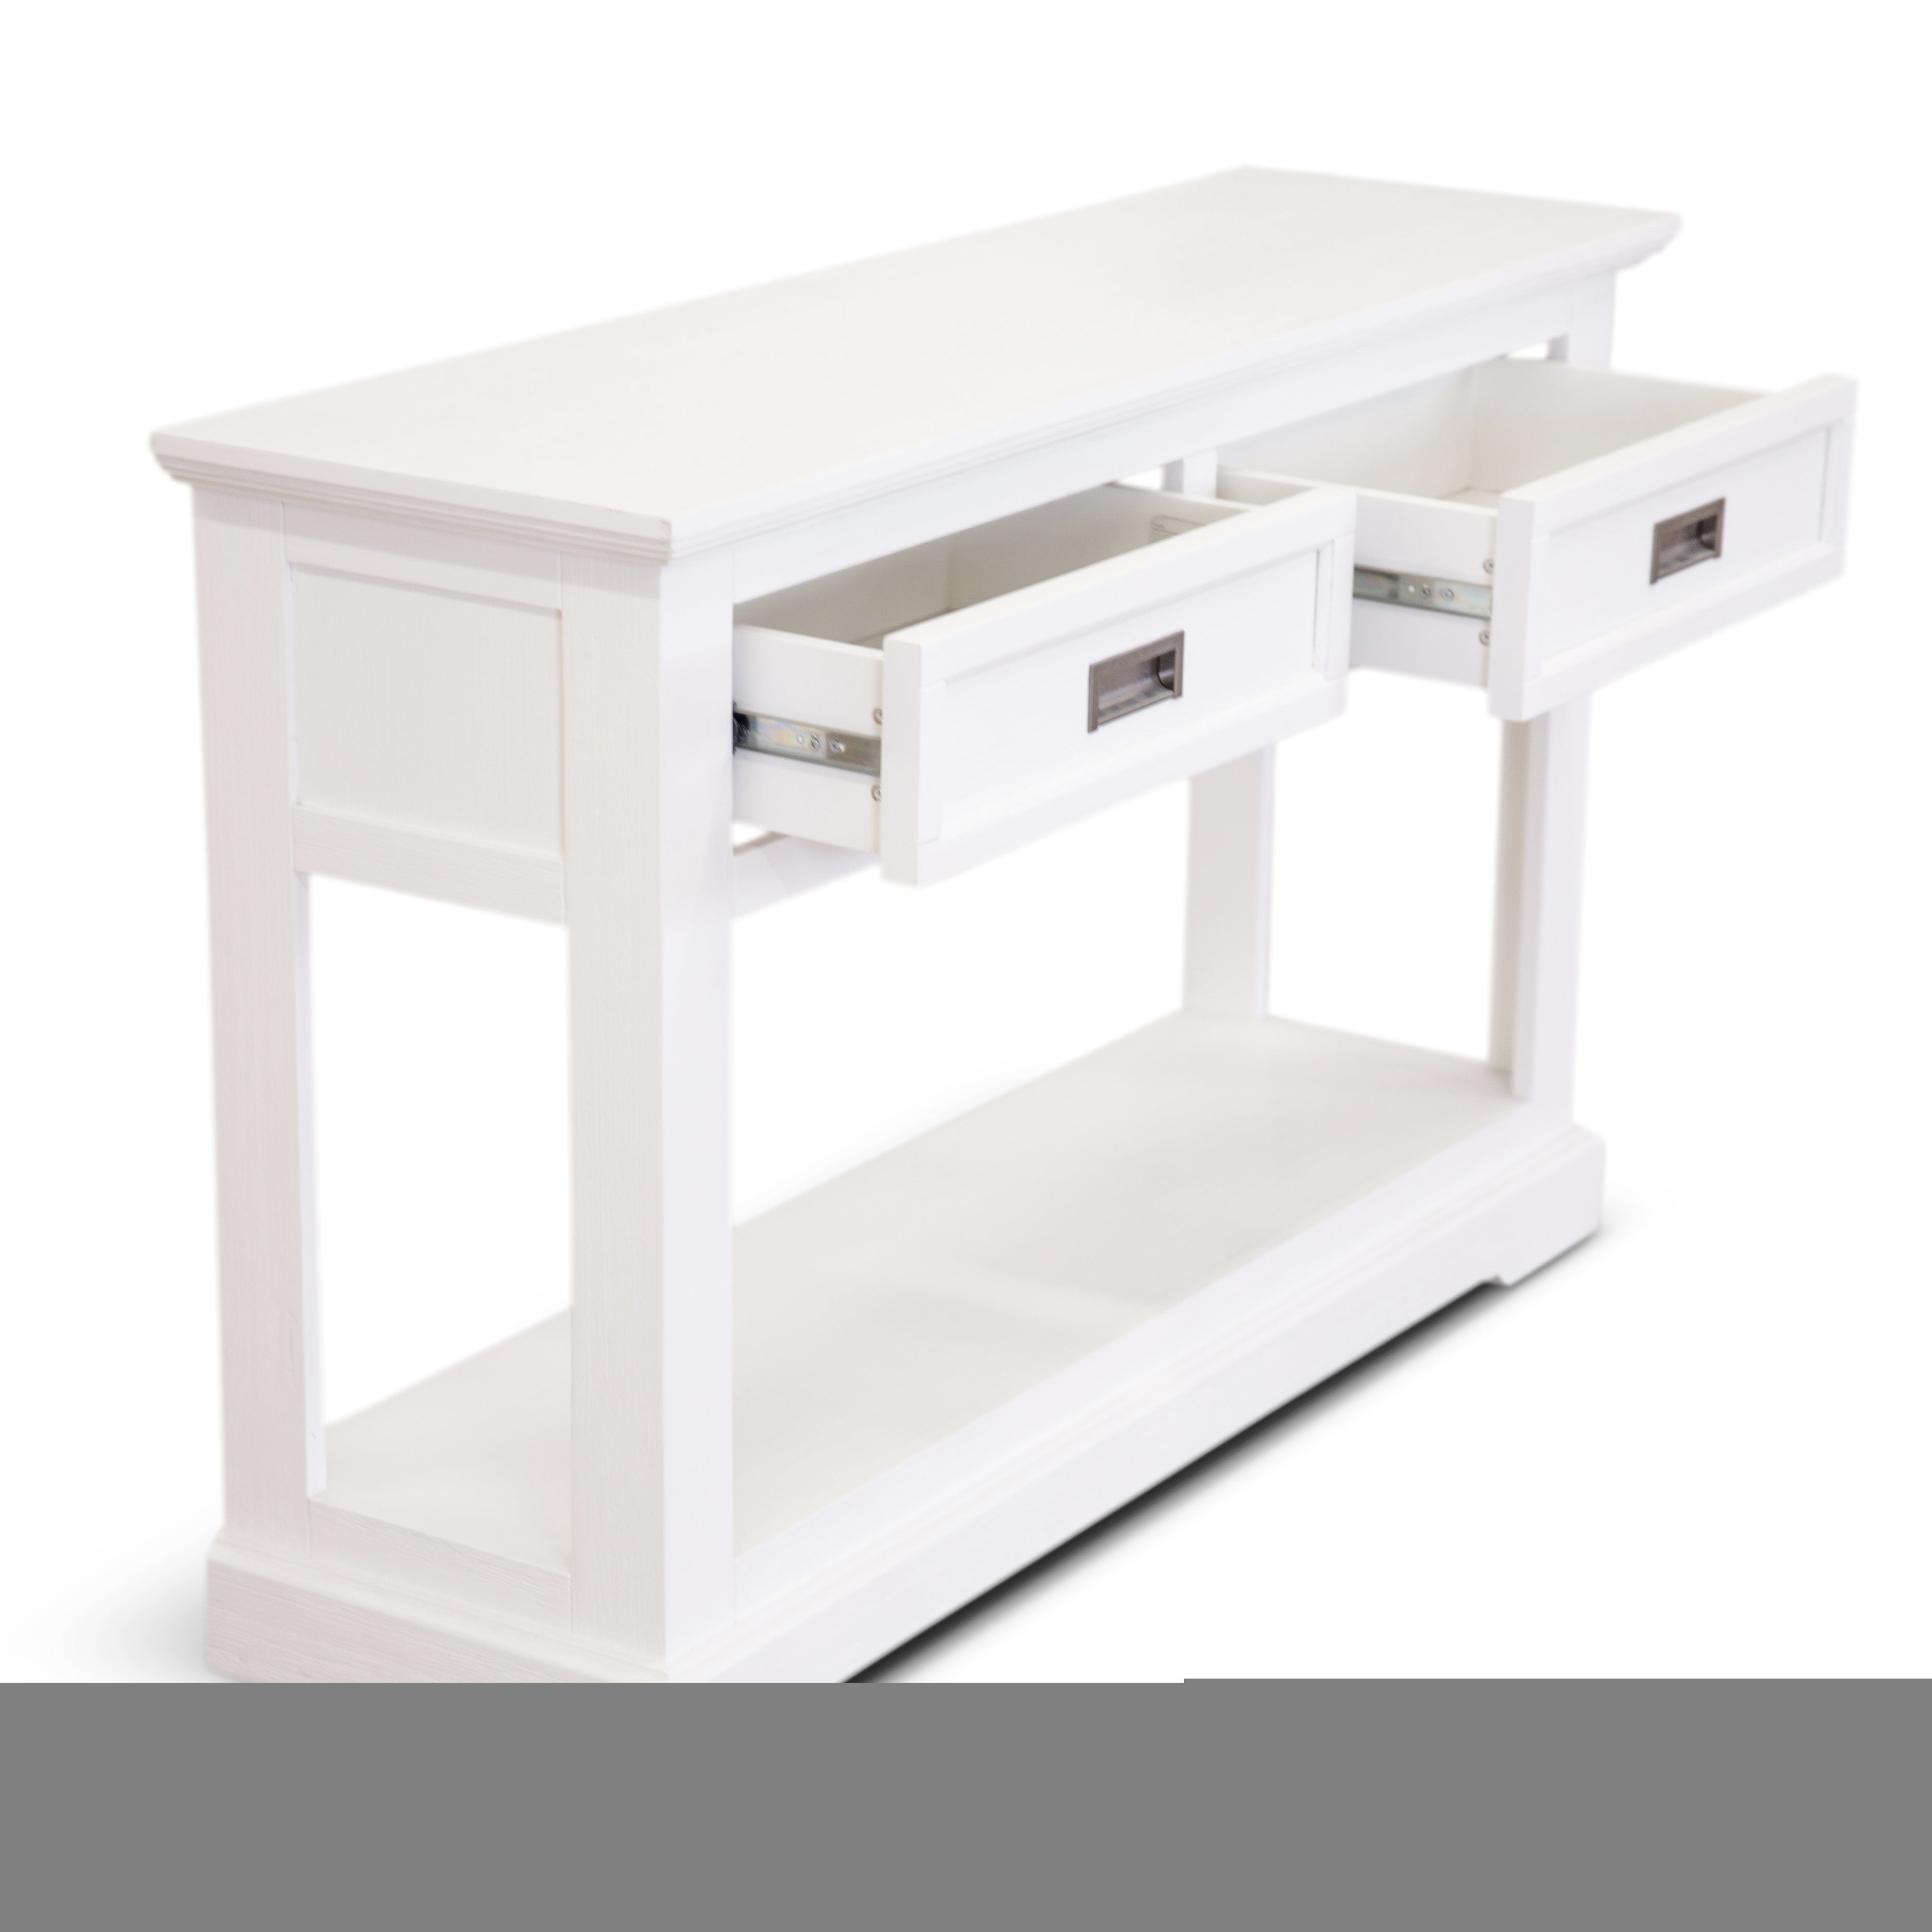 Solid Acacia Timber Wood Console Hallway Entry Table - Coastal White